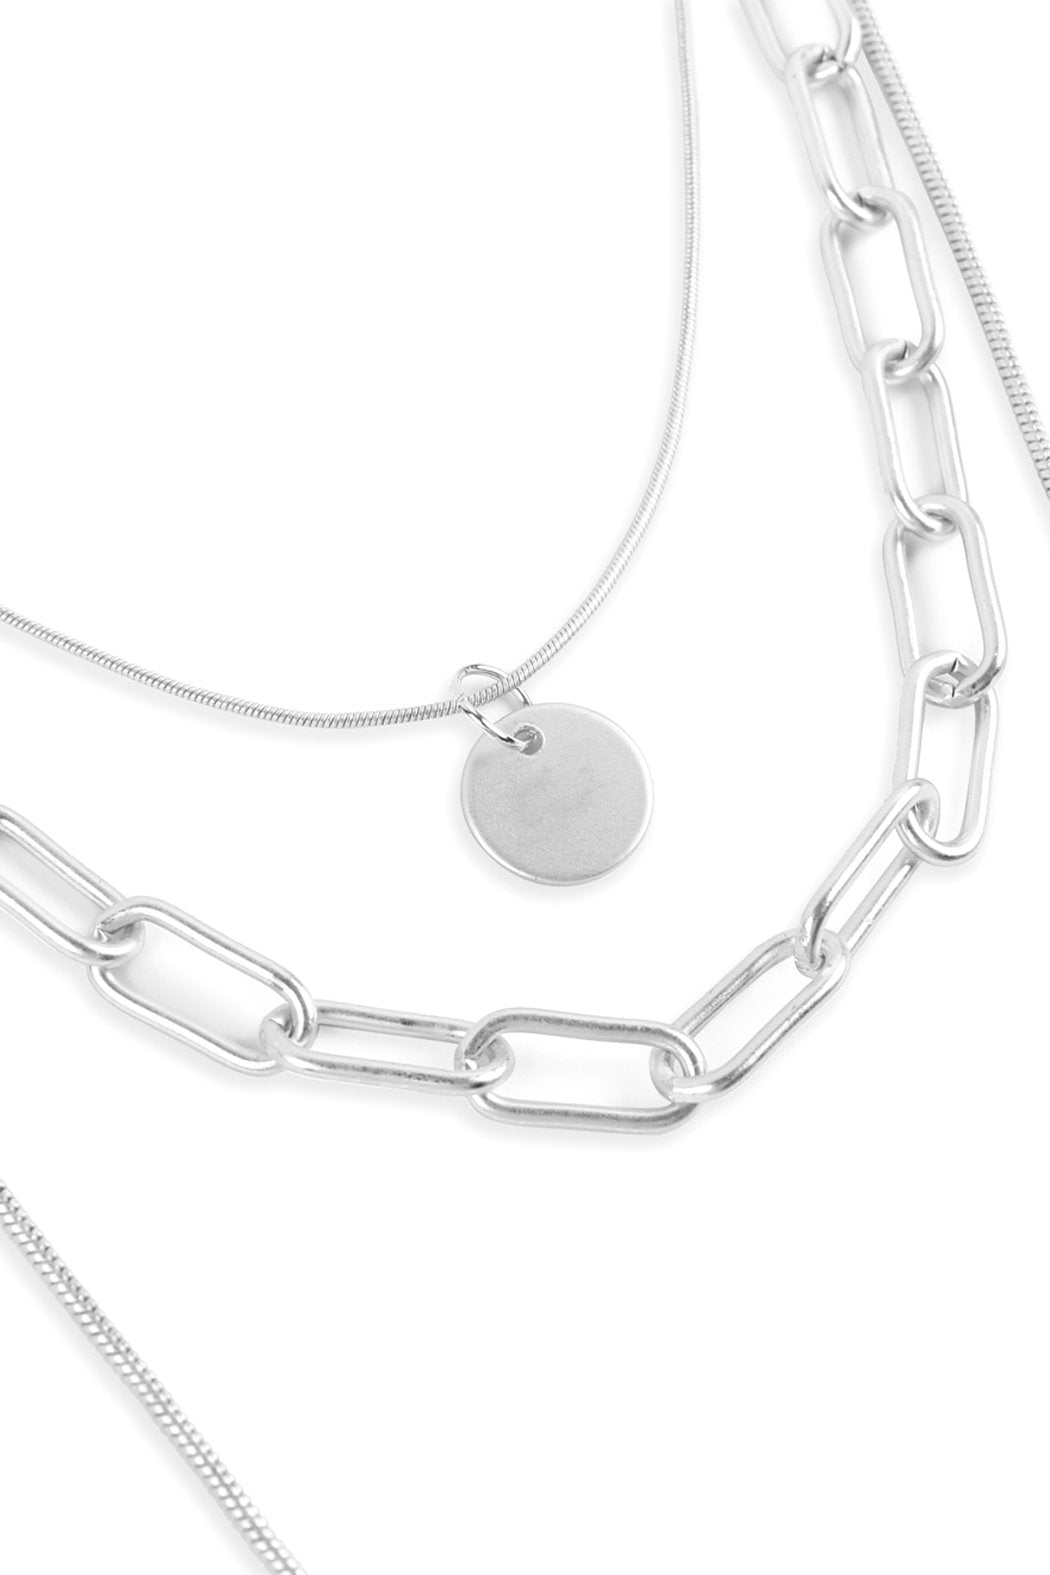 Hdn2639 - Chain Layered Pendant Necklace - LOLA LUXE